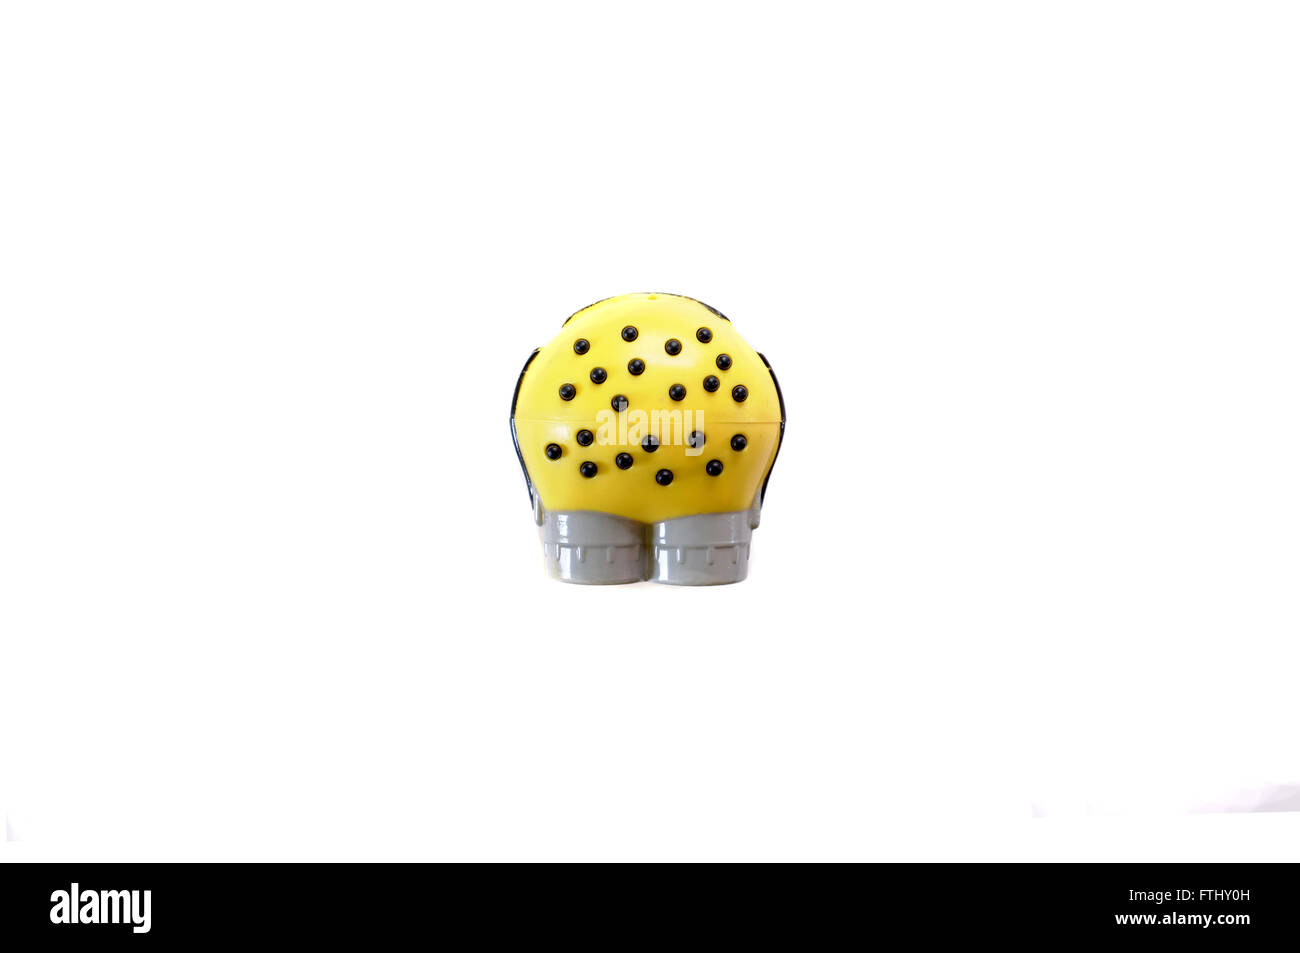 An overhead view of a toy figure from the Minions film photographed against a white background. Stock Photo